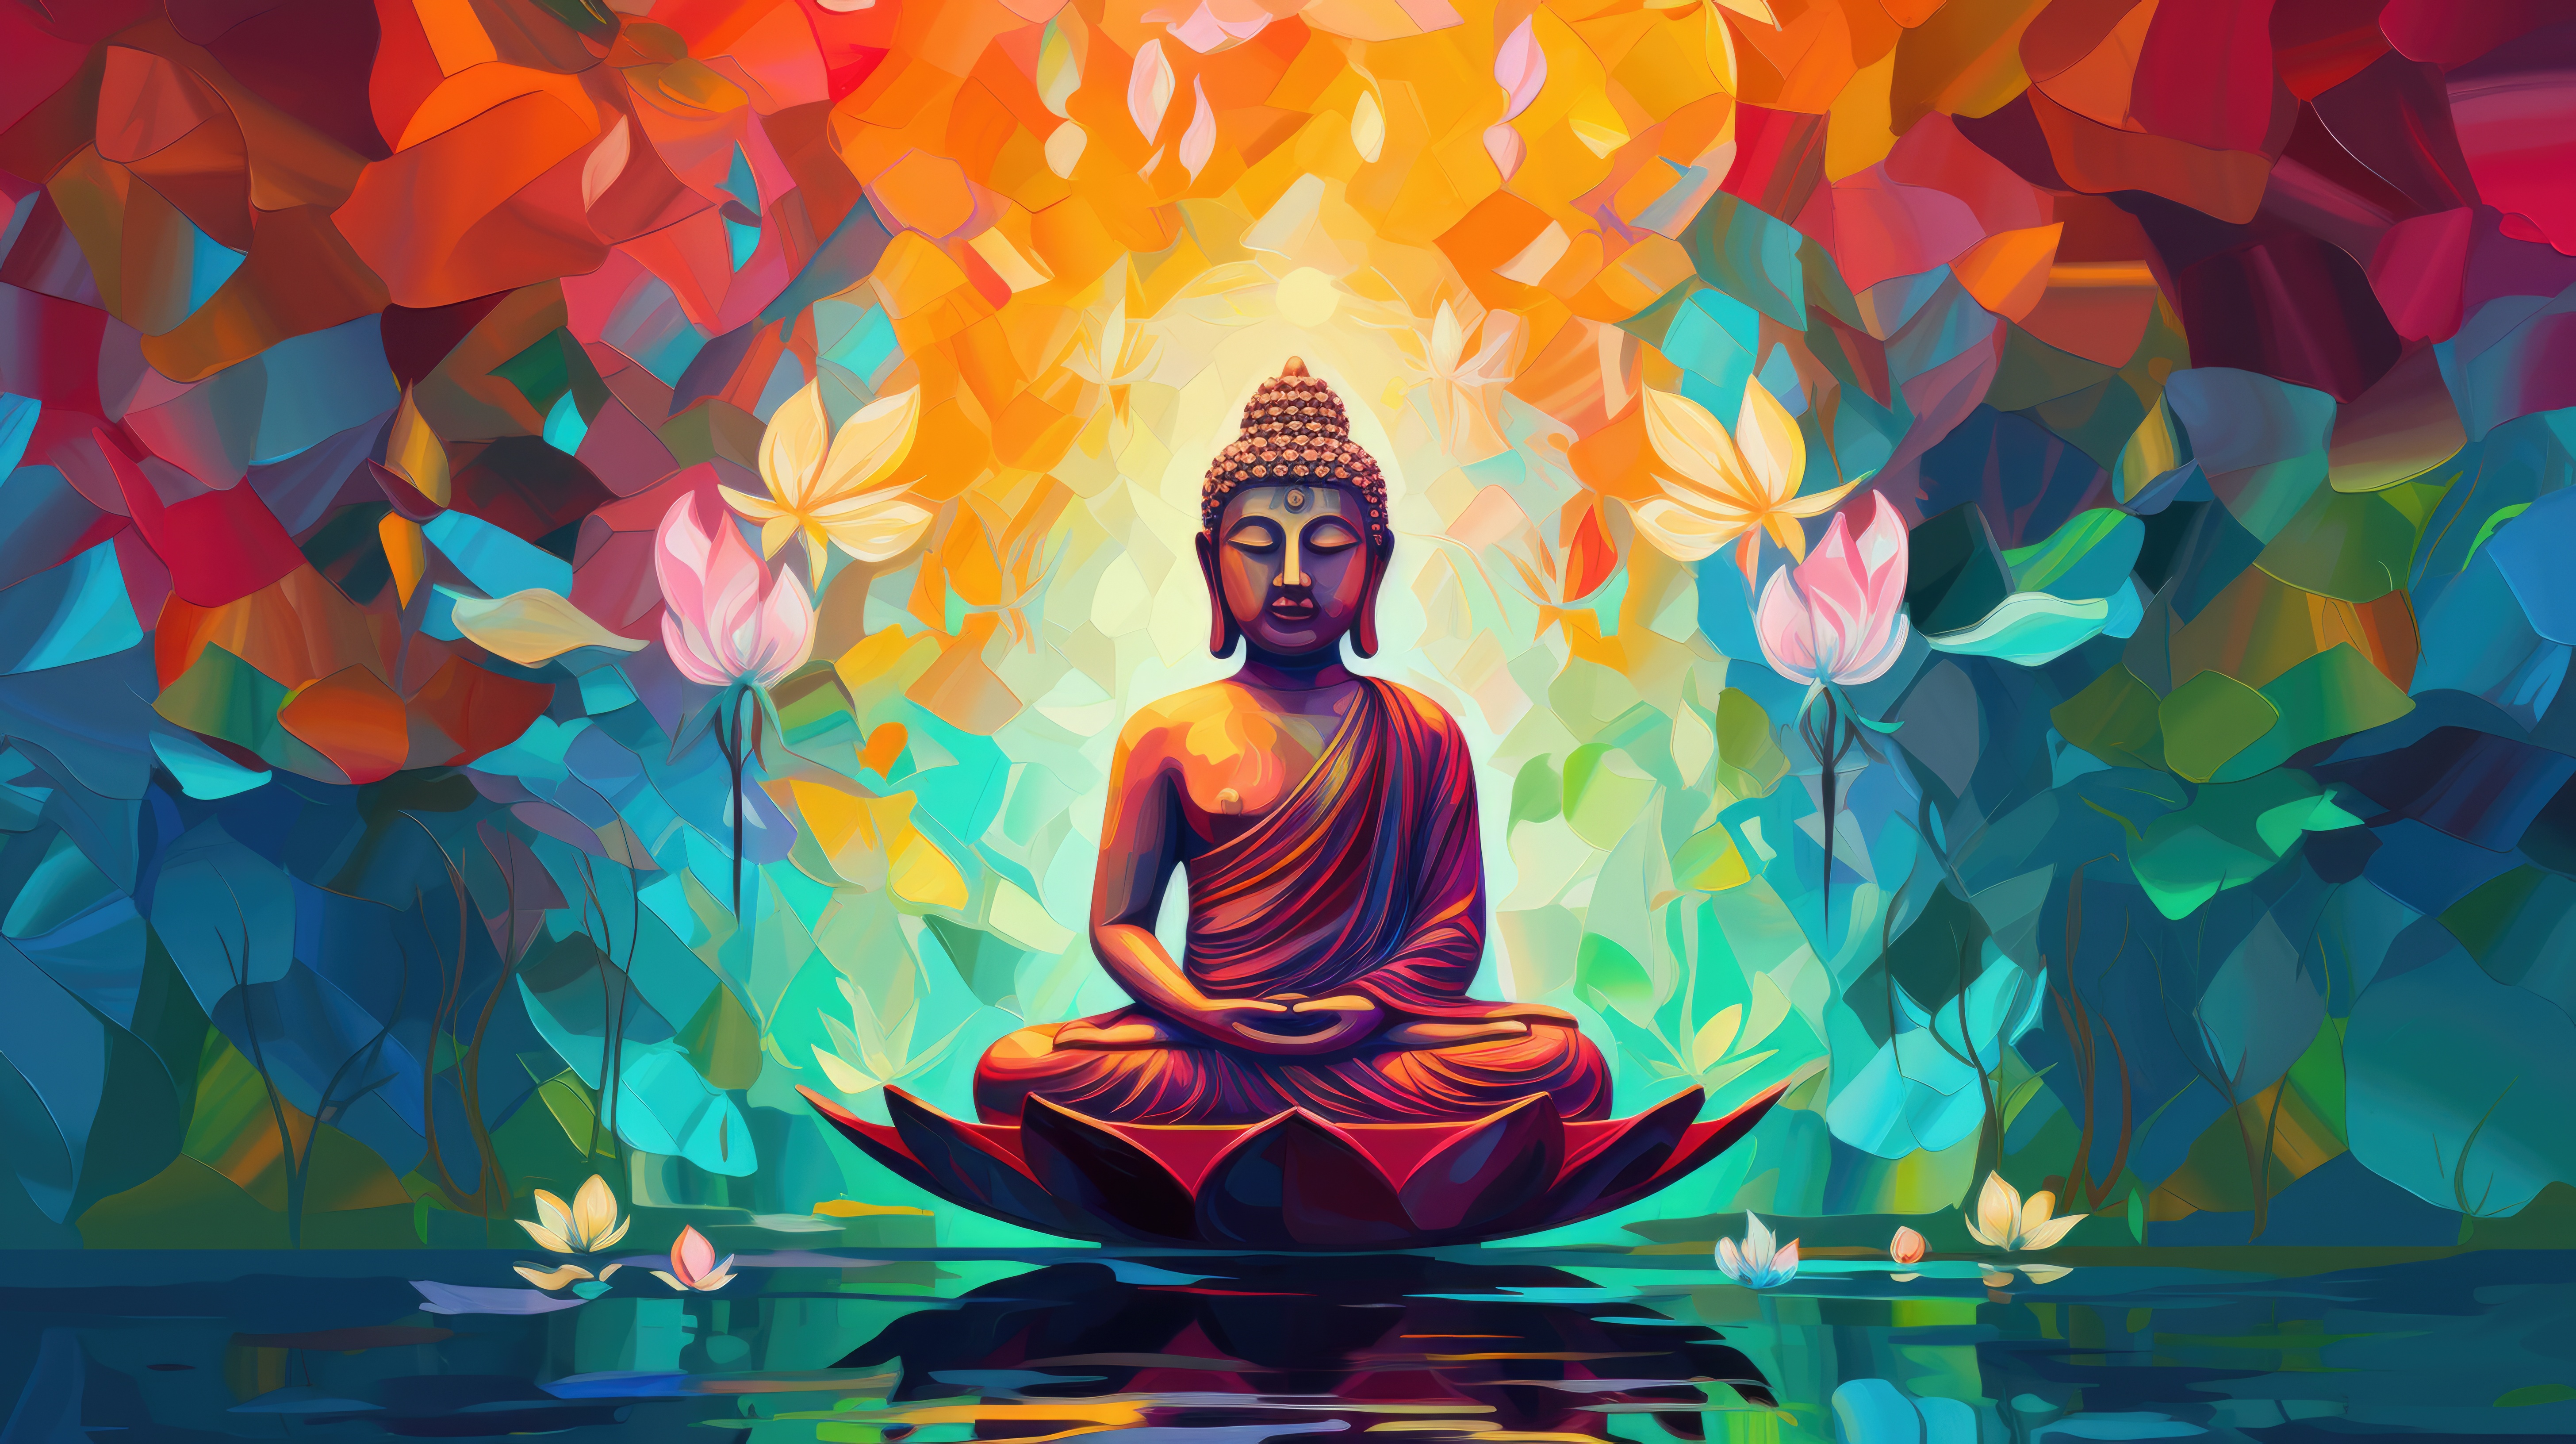 Buddha HD Wallpapers 1000 Free Buddha Wallpaper Images For All Devices